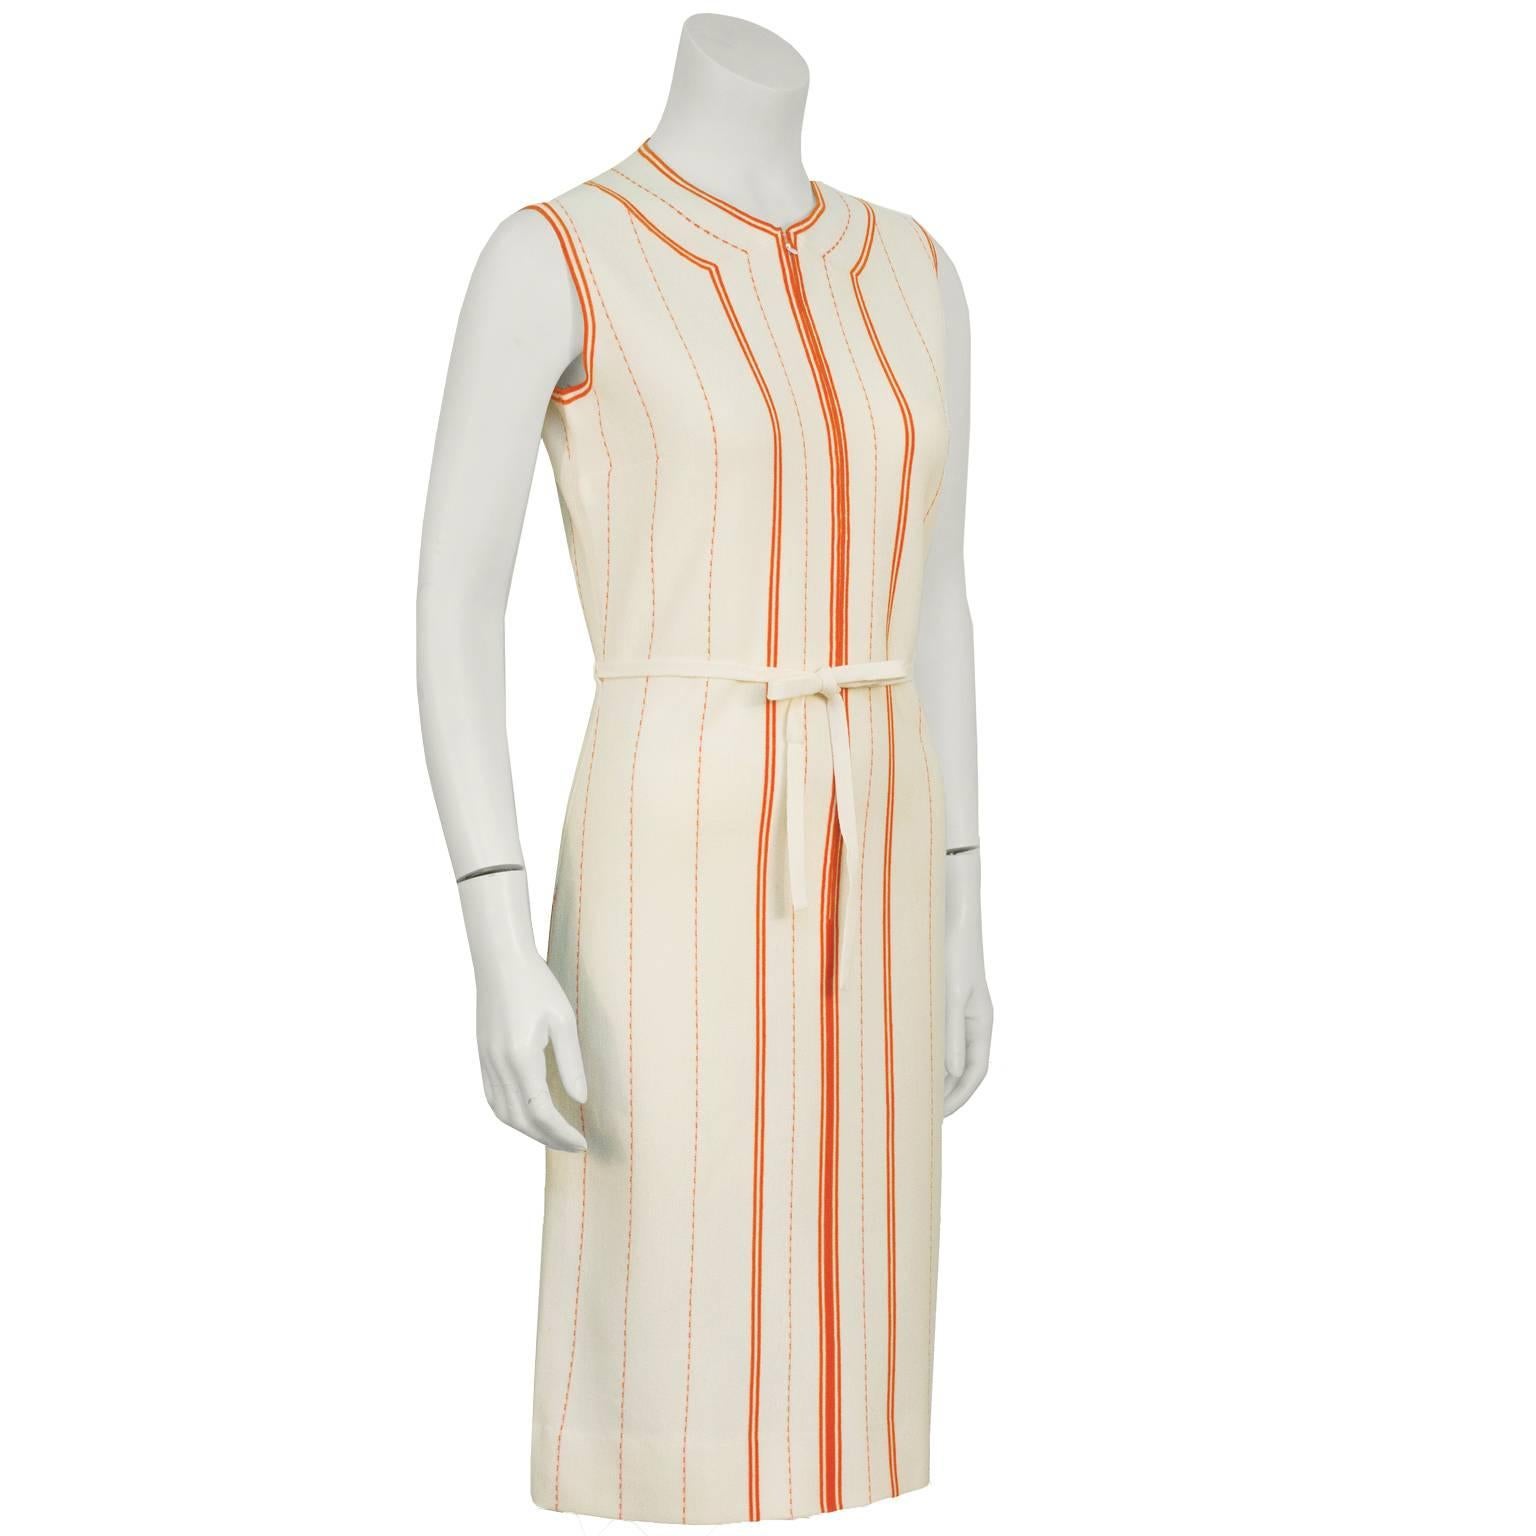 GIna Paoli, Italian super star manufacturer of wool knits mod dresses in the 1960's fabulous unused beige and orange wool knit dress with belt. The sleeveless  collarless dress zips up the front and has a matching beige belt that ties at the waist